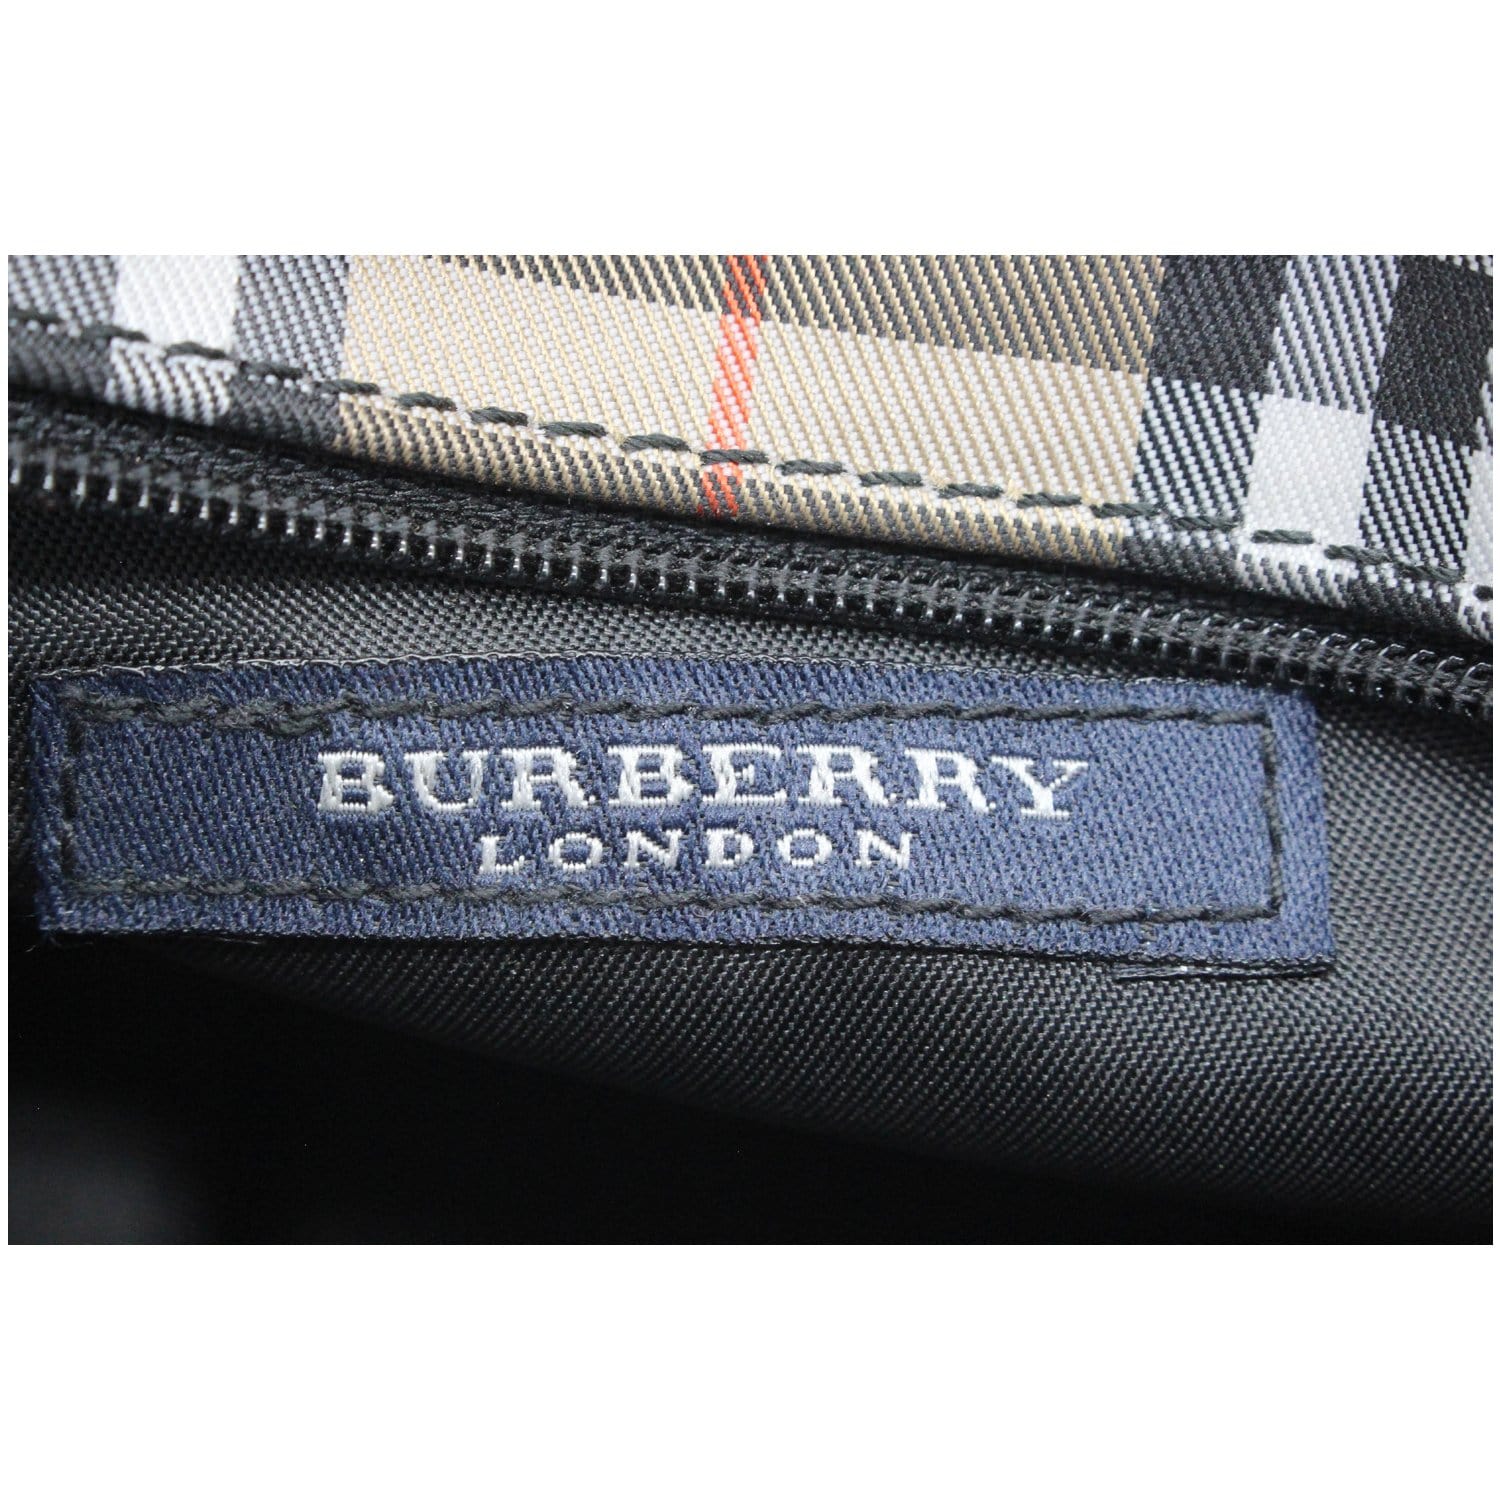 Burberry London Check Canvas Tote Bag Beige